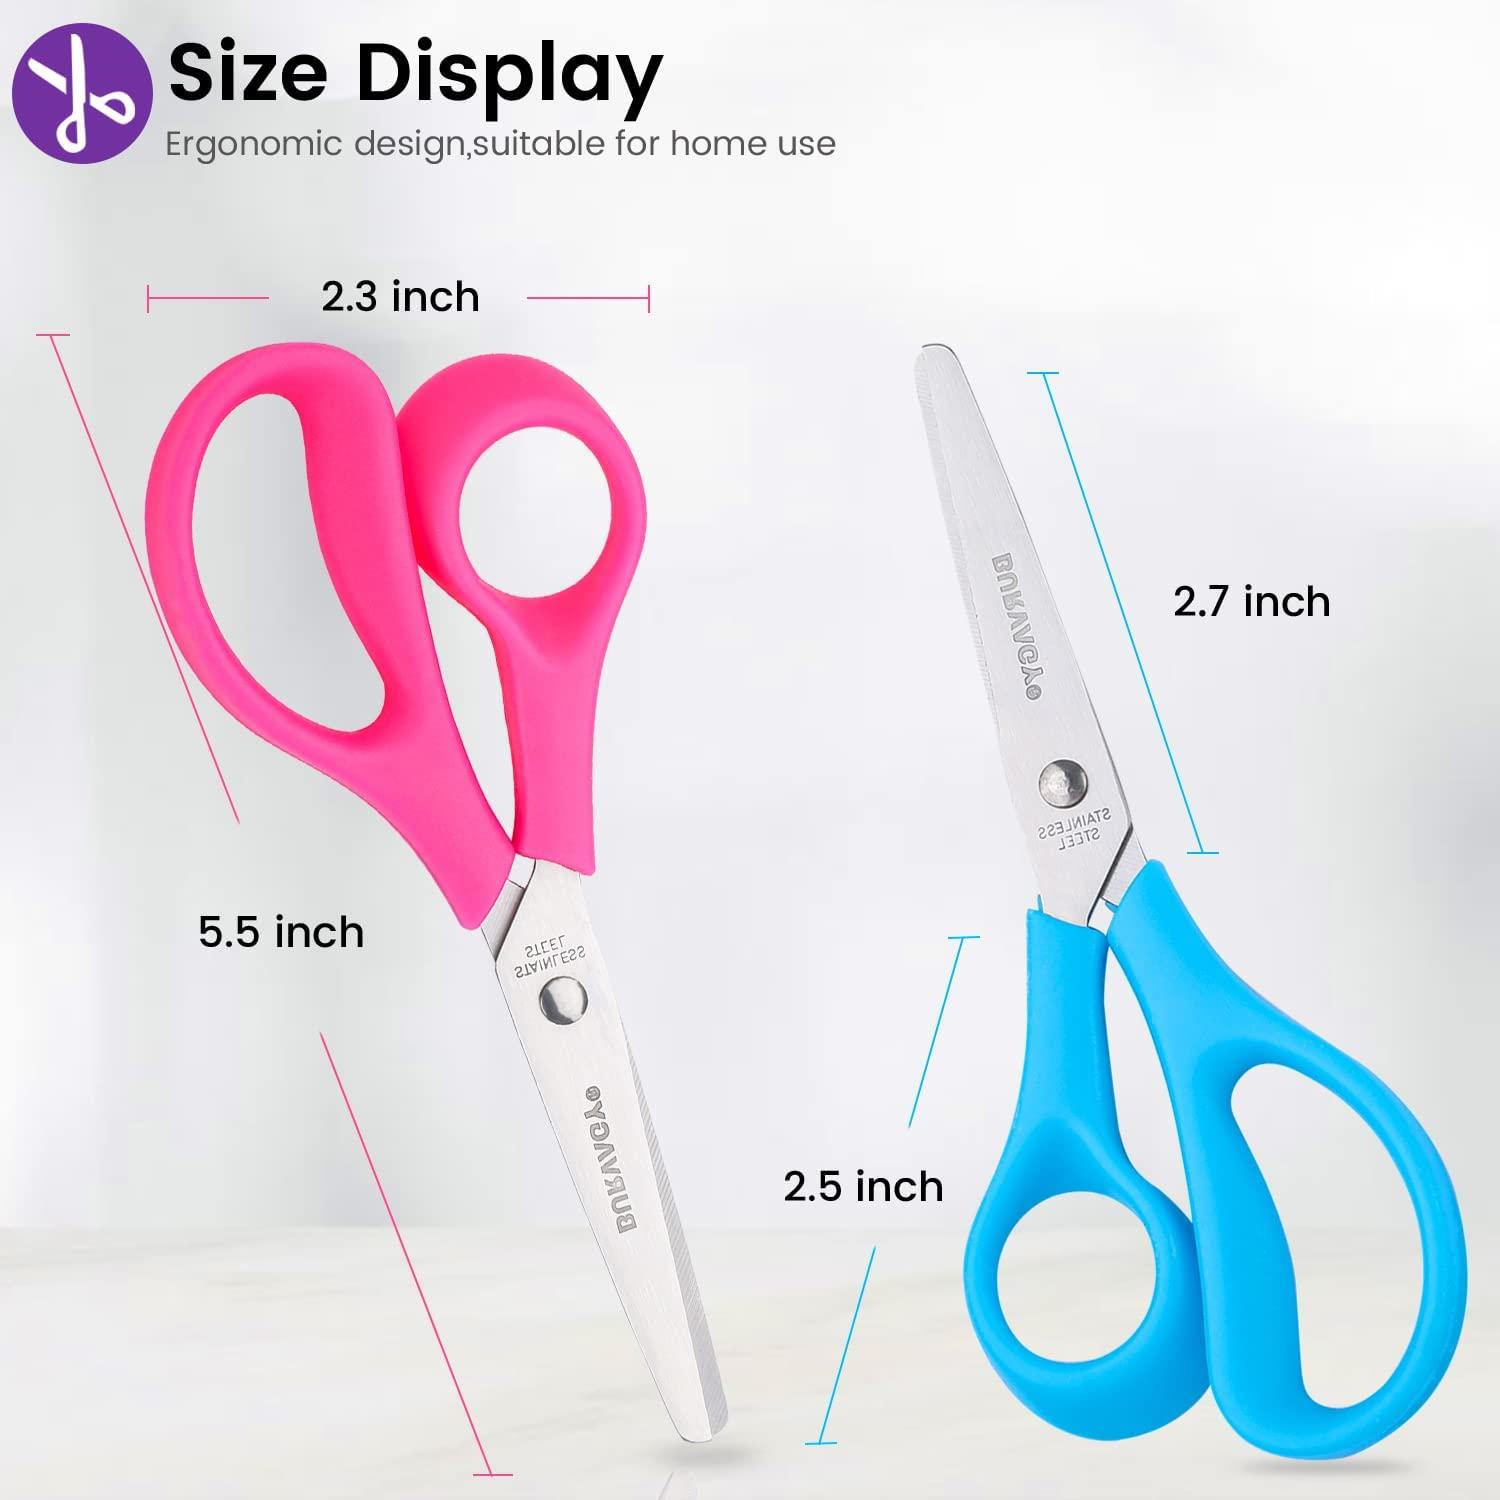 Stainless Steel Children Scissors Handmade Scissors Student Office Paper  Cutting Sharp and Small Sewing Scissors Household